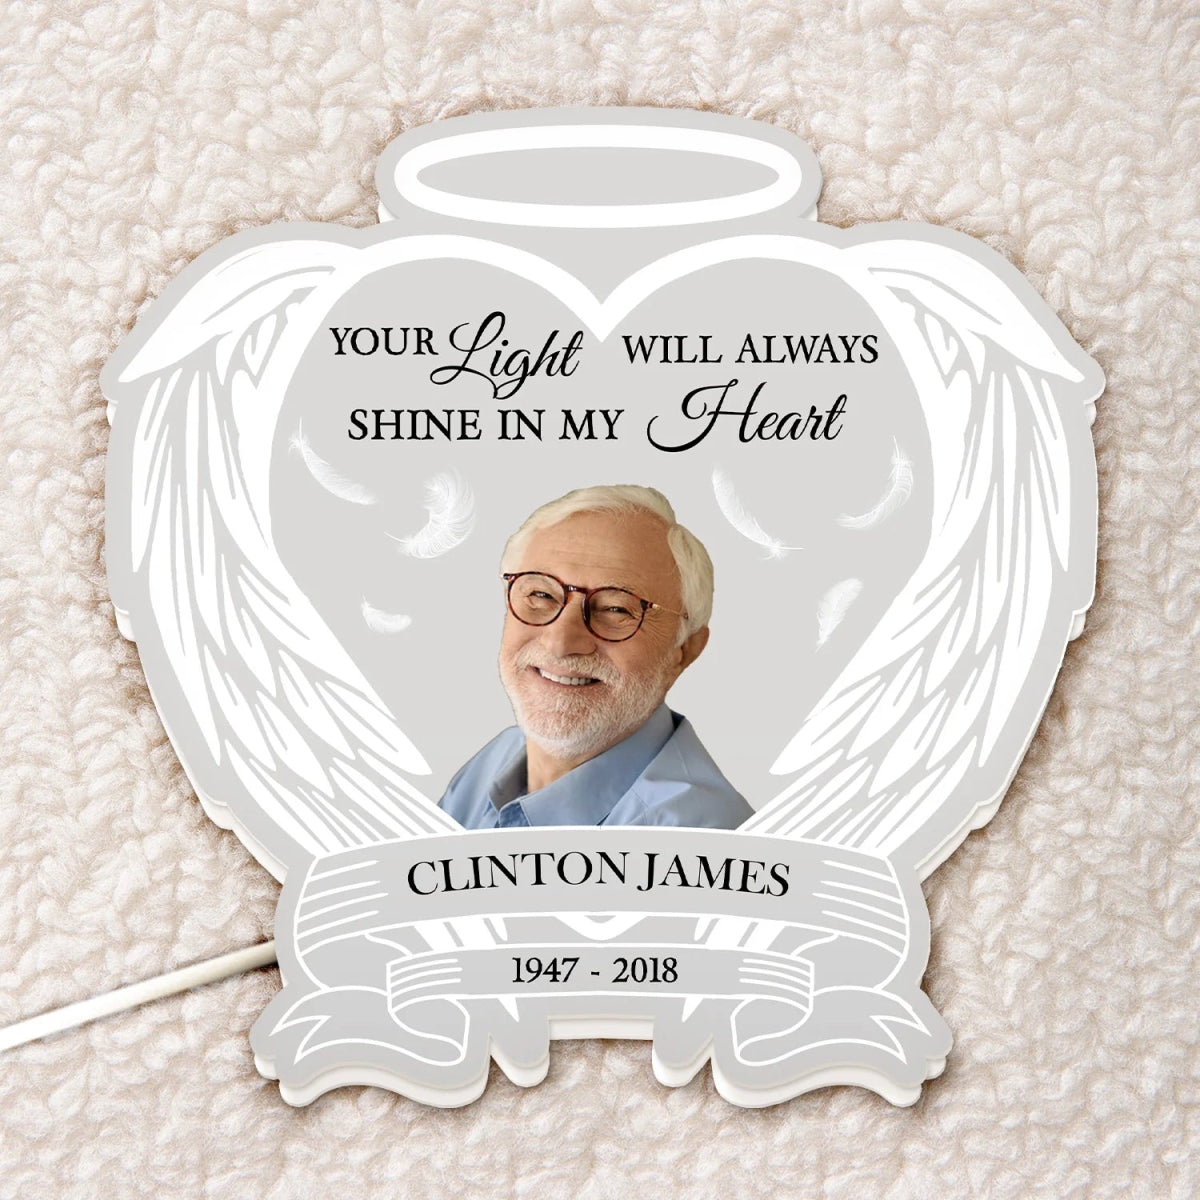 Family - Your Light Will Always Shine In My Heart - Personalized Photo Light Box (HJ) - The Next Custom Gift